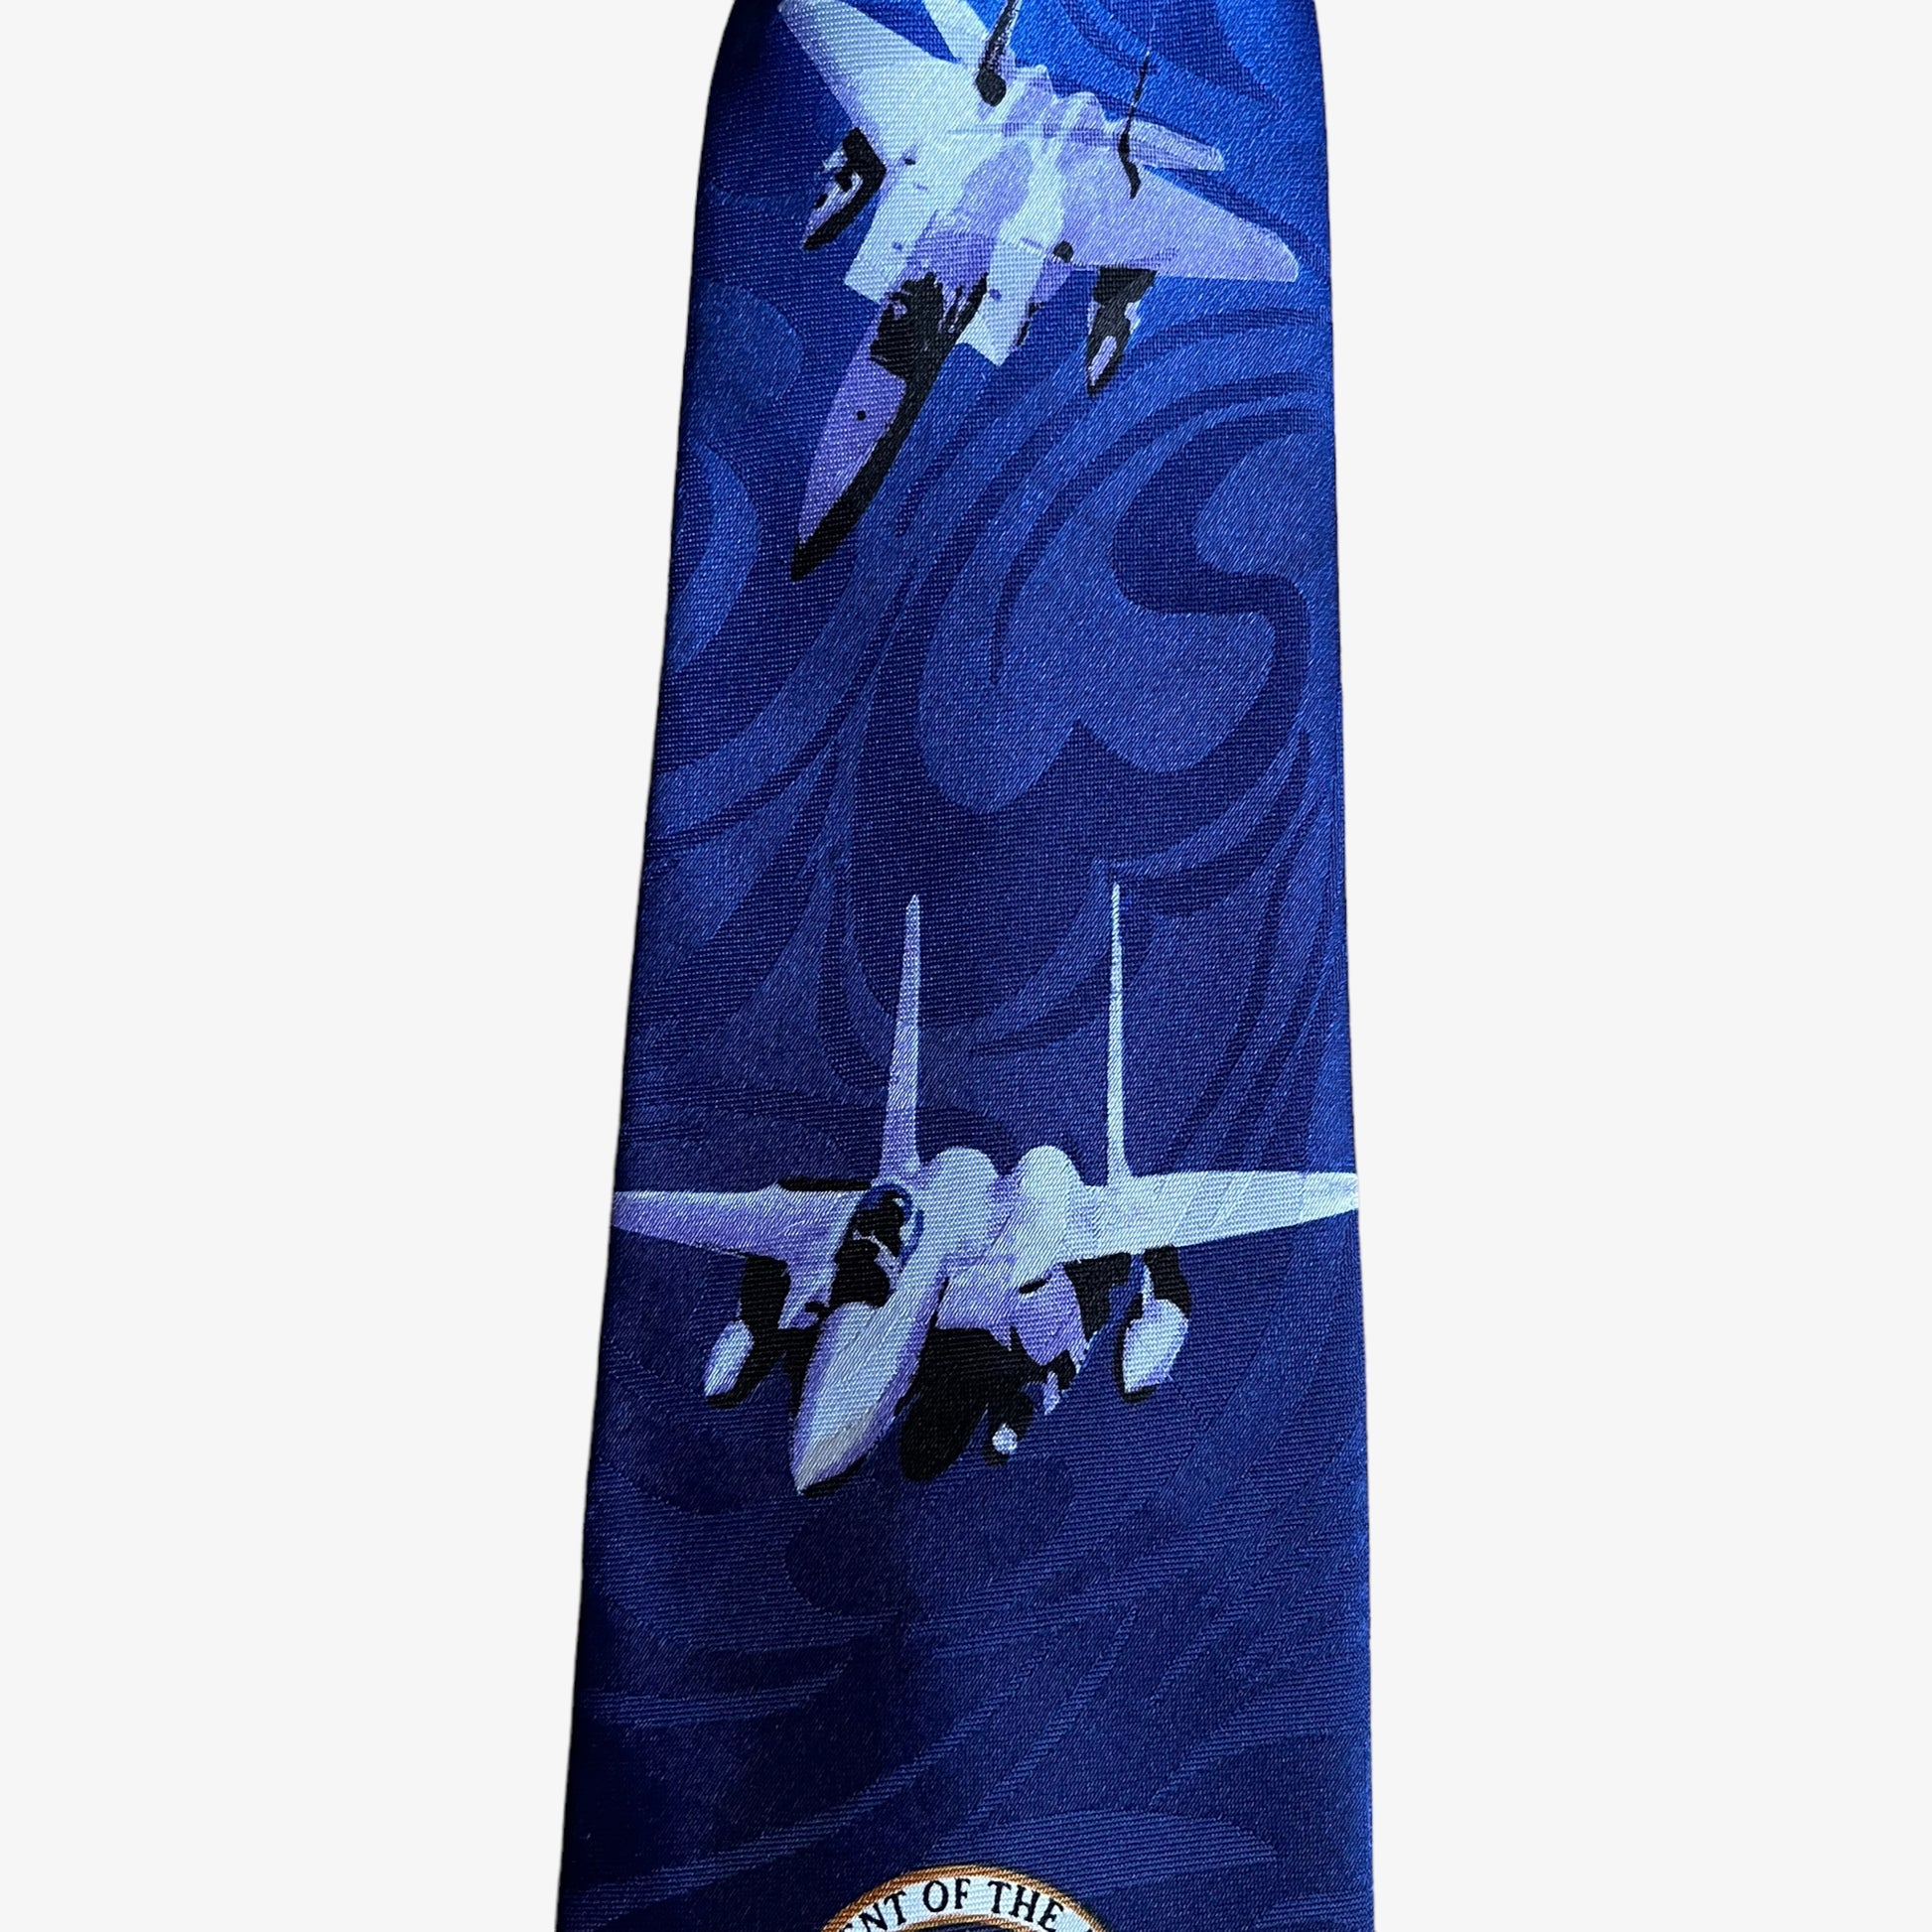 Vintage 90s Steven Harris United States Of American Air Force Polyester Tie Pilot - Casspios Dream